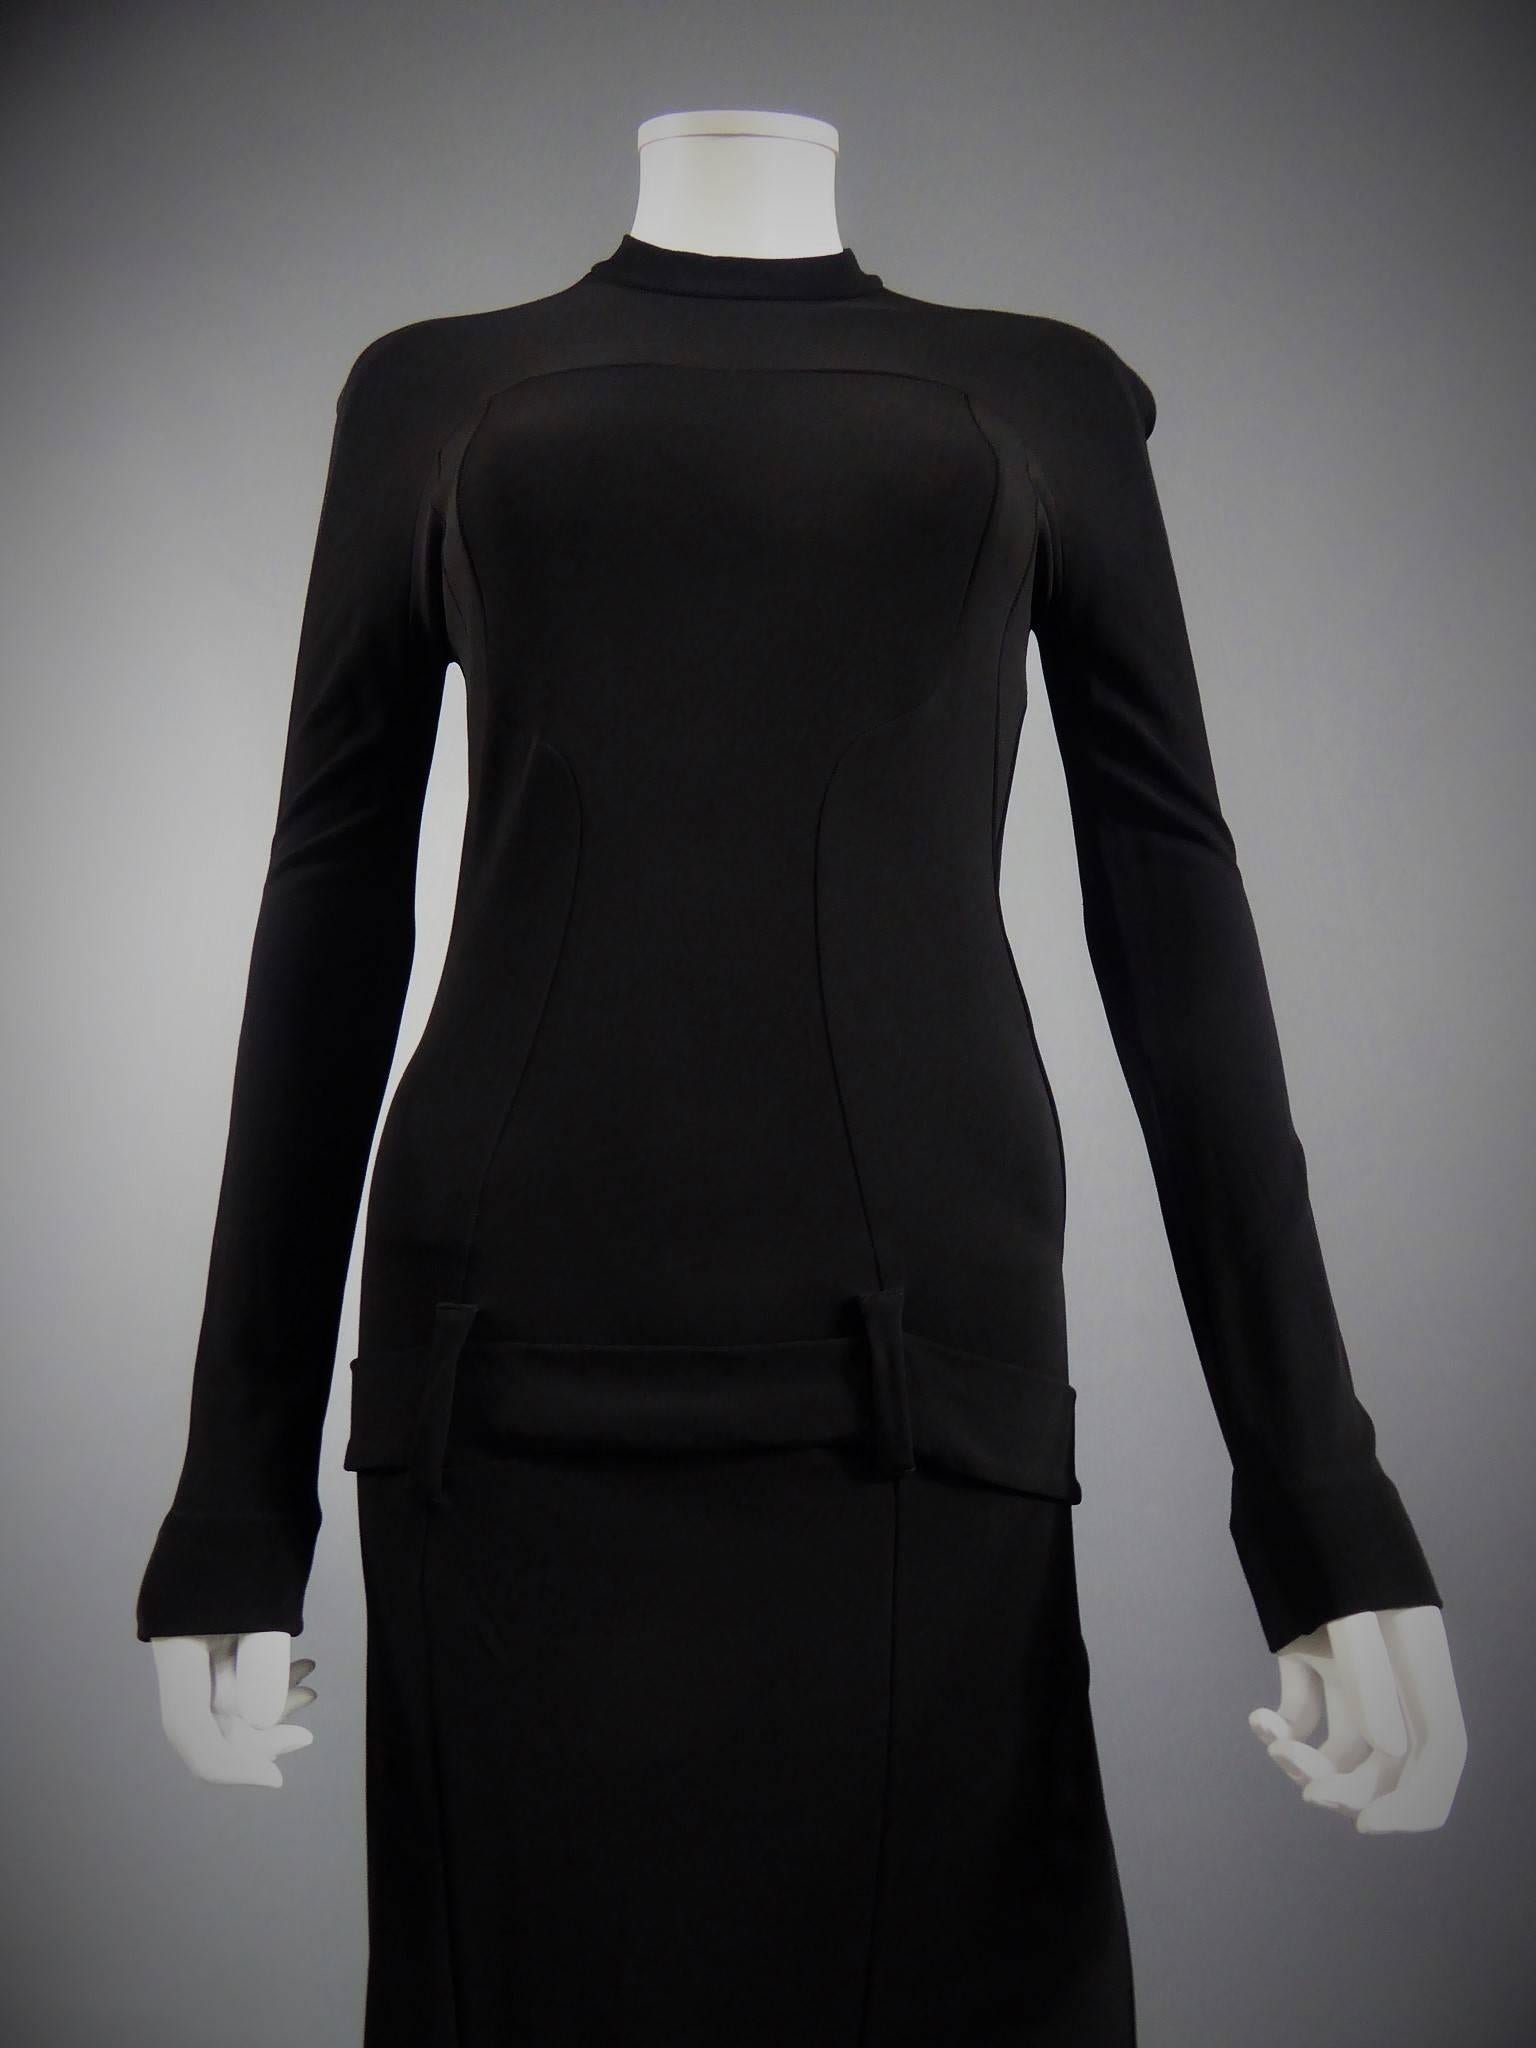 Circa 2000

France

Balenciaga black dress in elastic black jersey. Long sleeves. Nicolas Ghesquière line. Details on the sides, half belt on the front ending at the buttocks. Mid-long skirt under the dress. Zip closure in the back. Very fitted.